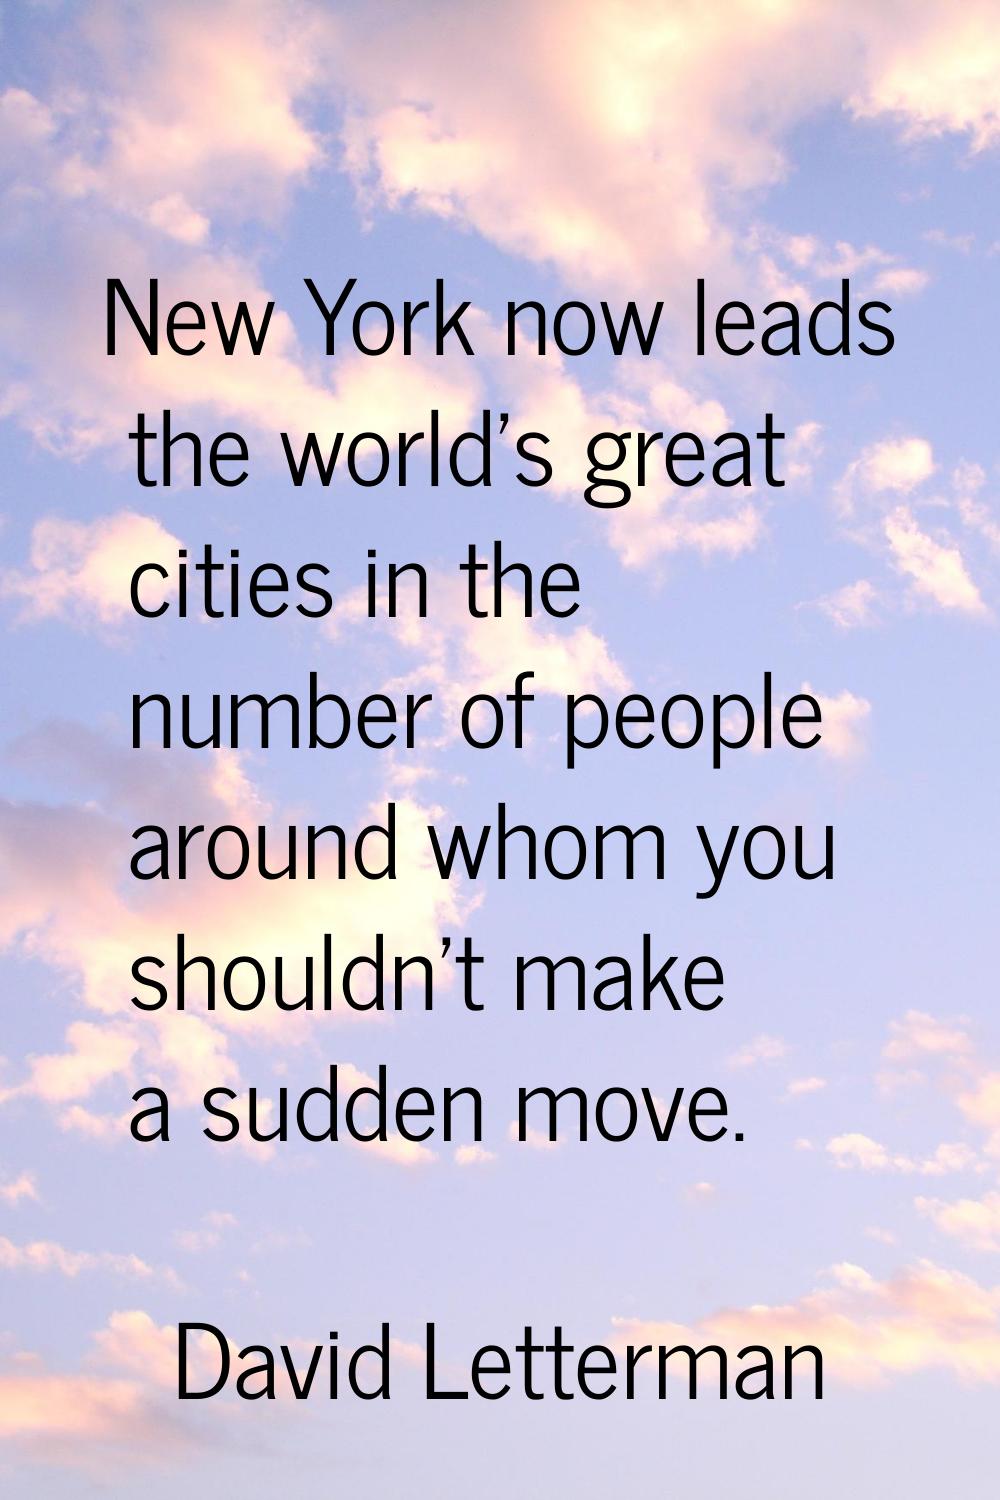 New York now leads the world's great cities in the number of people around whom you shouldn't make 